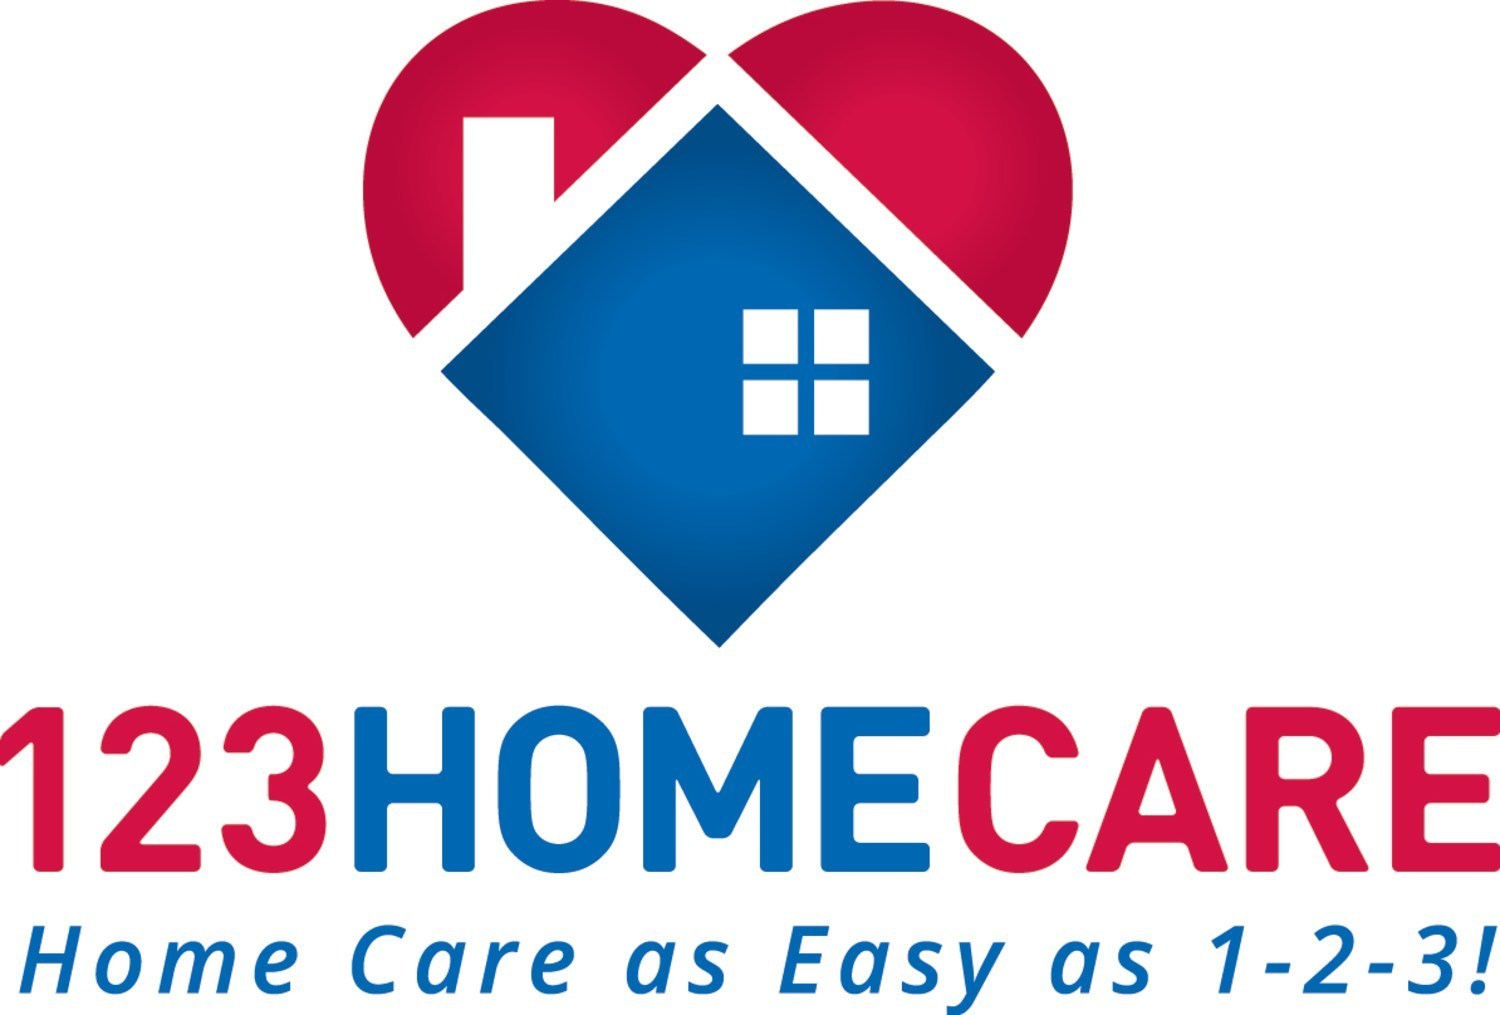 123 Home Care is the leading provider of high-quality non-medical home care services with 27 locations serving California.